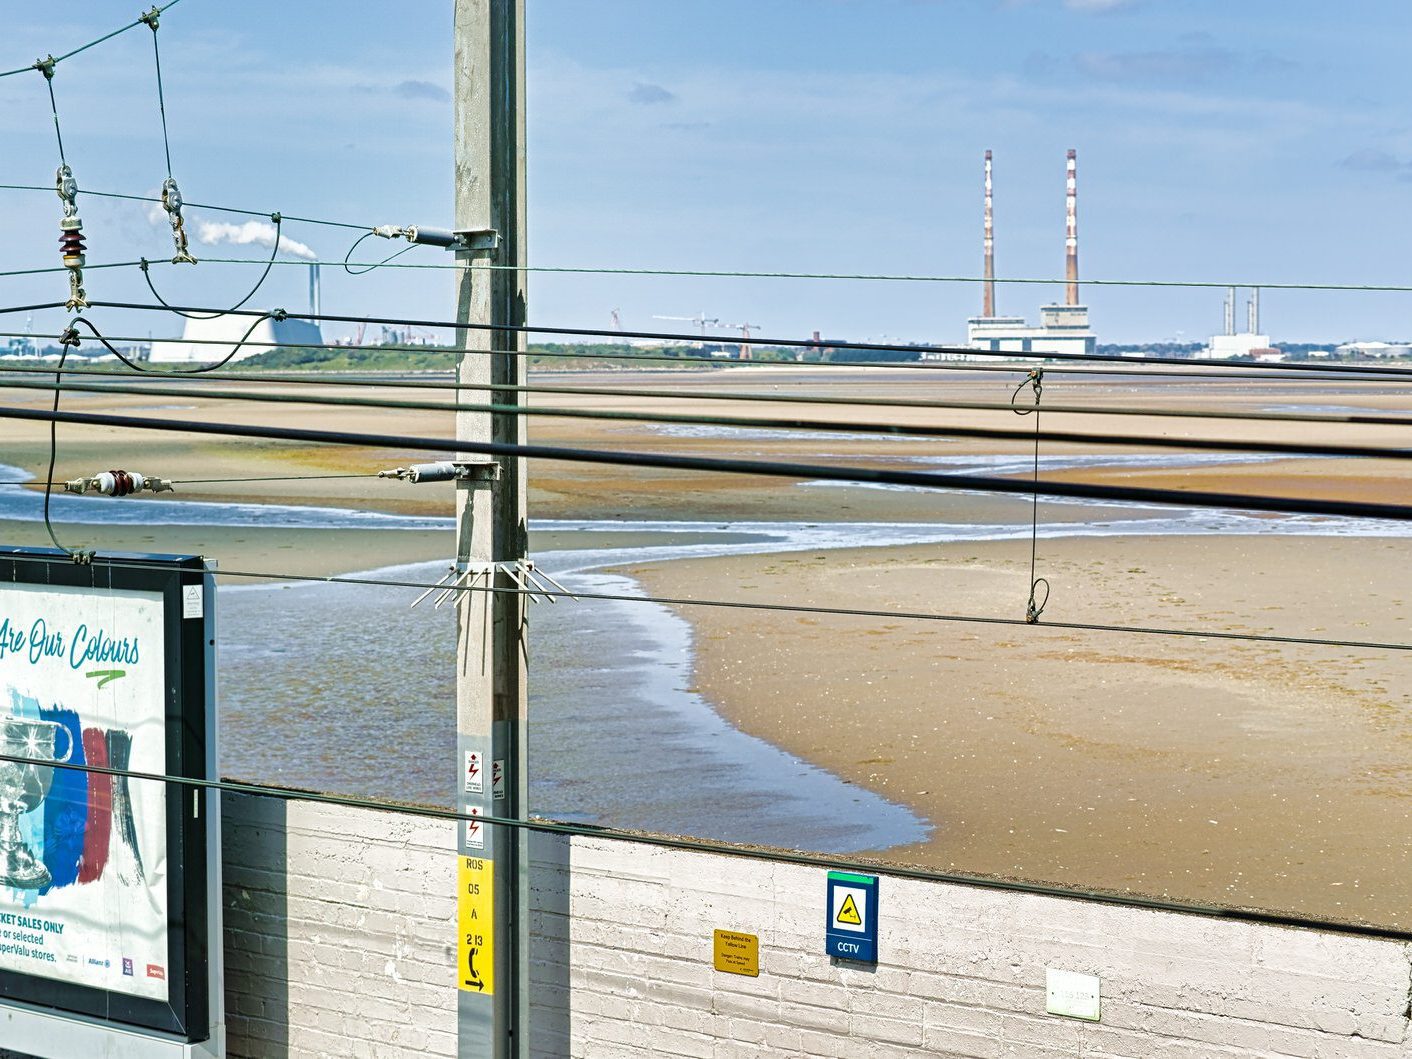 BOOTERSTOWN MARSH AND TRAIN STATION [I USED A SIGMA DP3 QUATTRO] 007